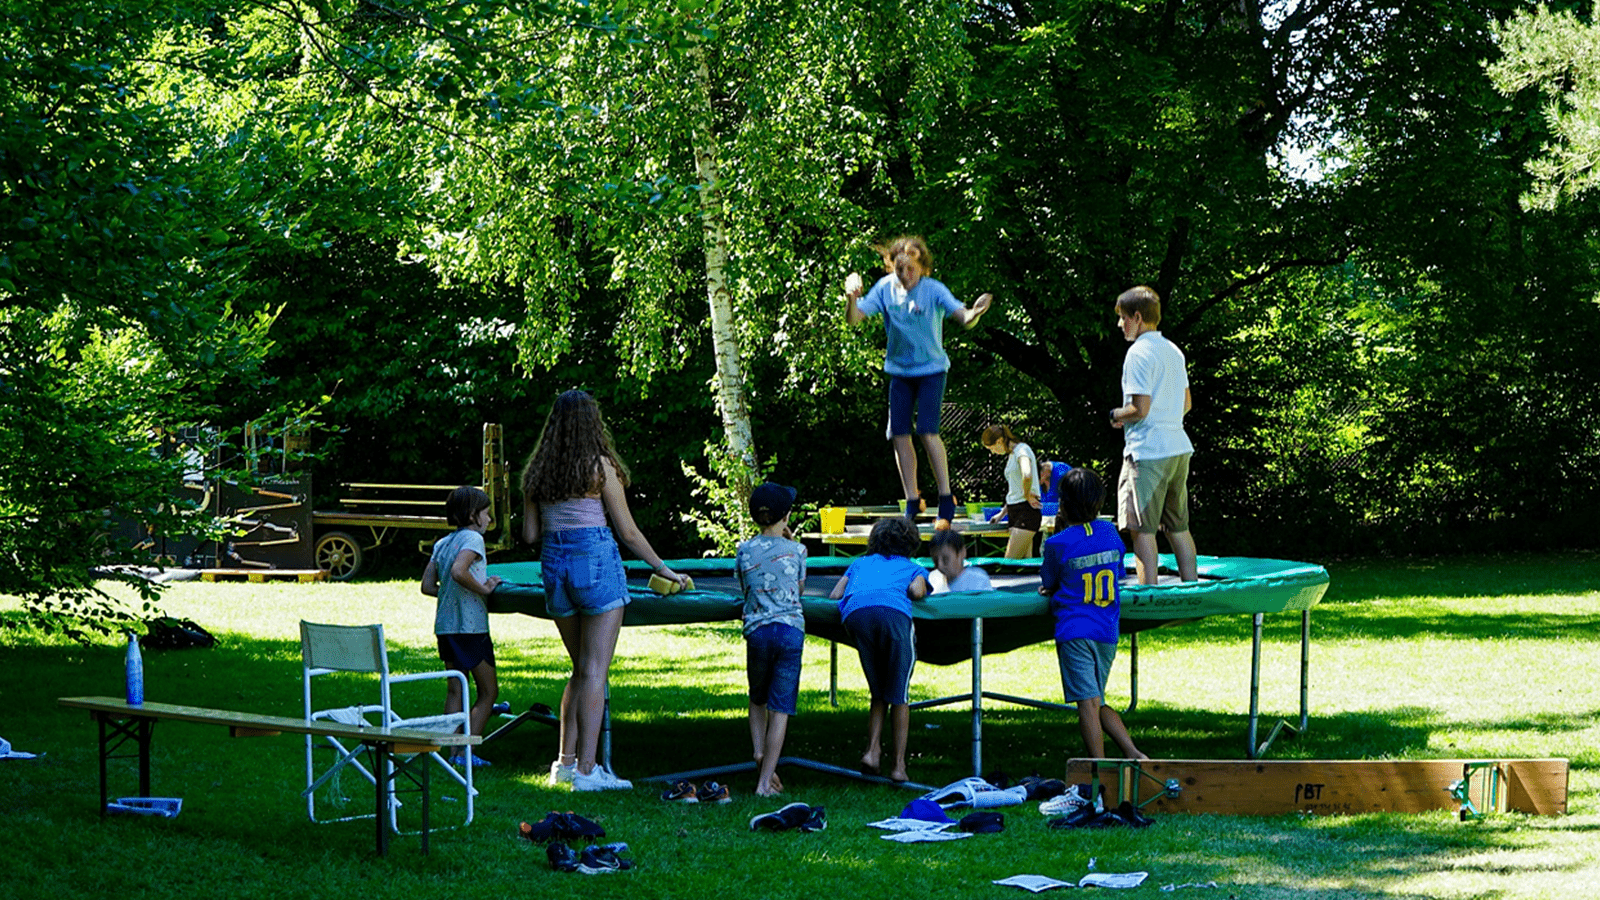 Summer campers jump on a trampoline.